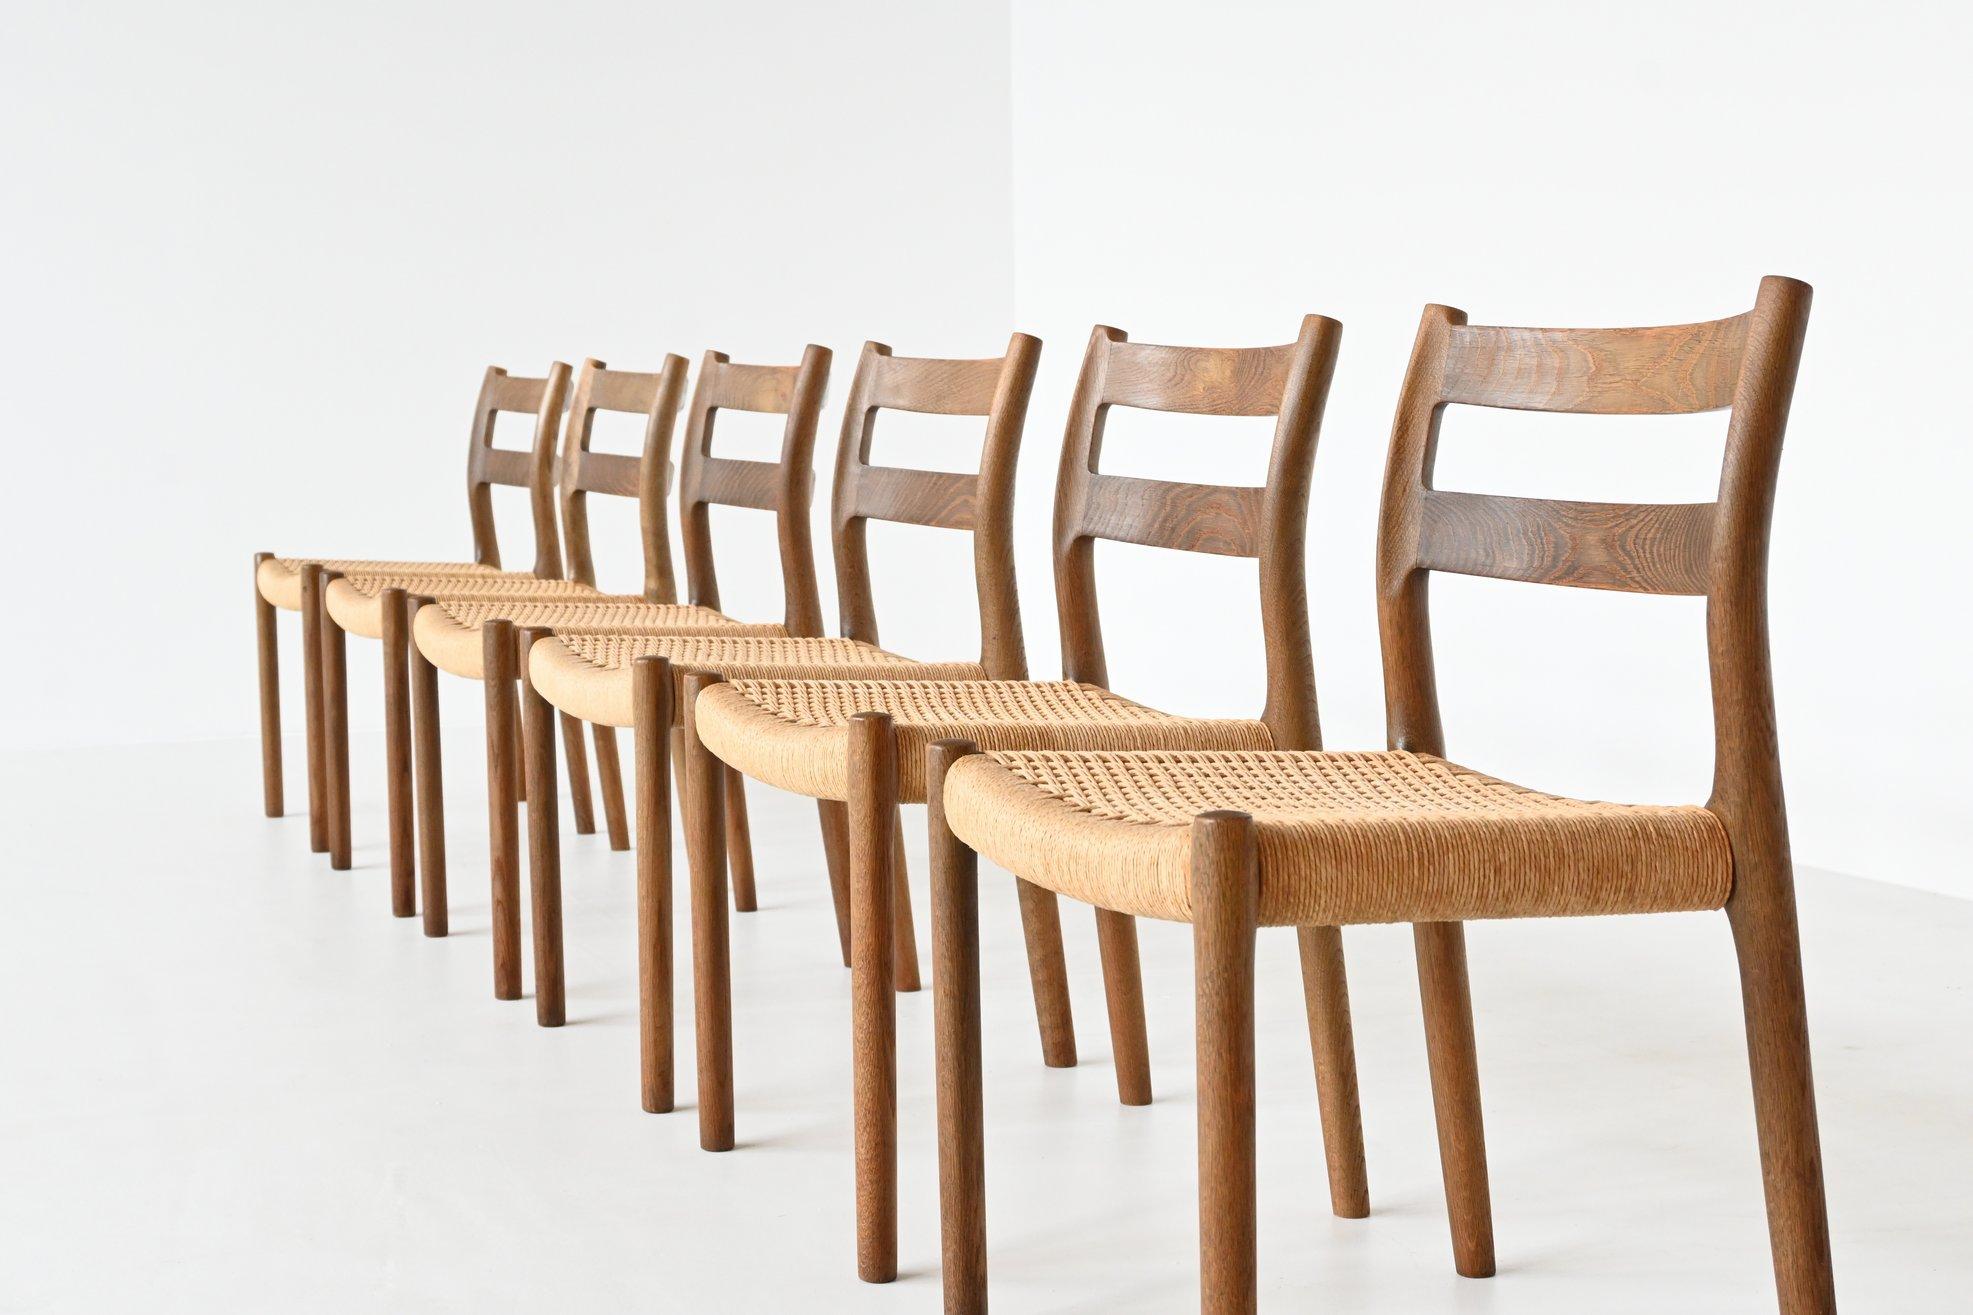 Very nice set of six dining chairs model 84 designed by Niels Otto Møller and manufactured by J.L. Møller Mobelfabrik, Denmark 1960. They are made of solid stained oak wood and the seats are upholstered with paper cord. These well-crafted chairs are